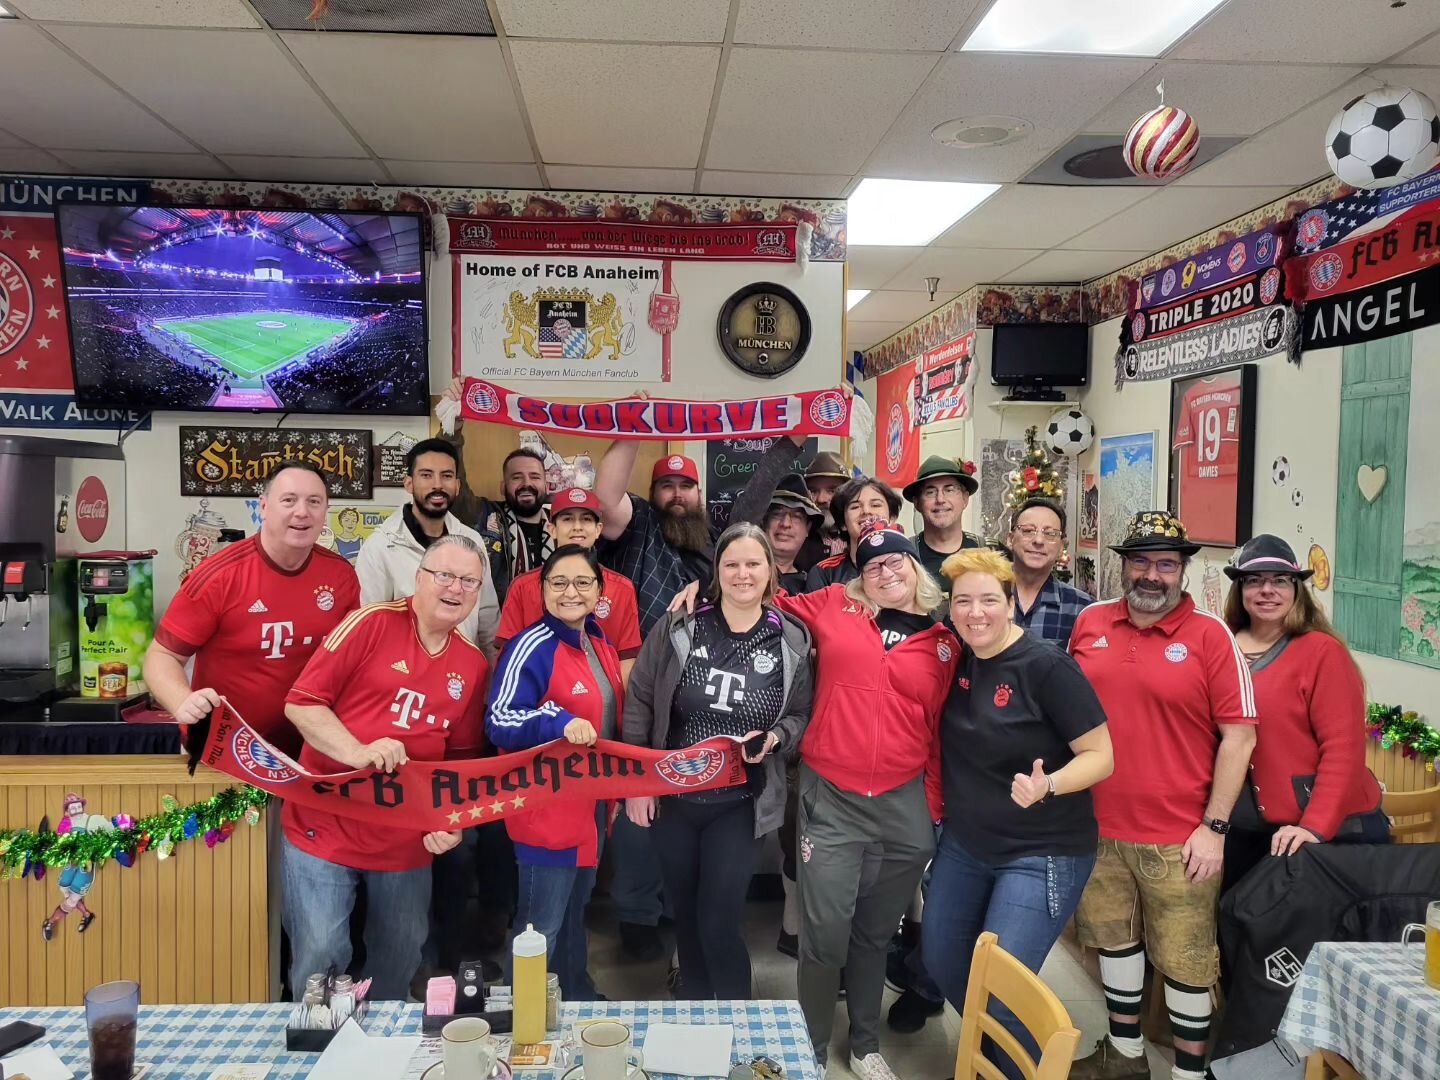 Great turn out for a bad game. Thank you for waking up this early to watch with us!
#fcbayern #ContinentalDeli #MiaSanMia #lederhosenclub #Bundesliga #MiaSanFamily #earlybirds #bayernm&uuml;nchen